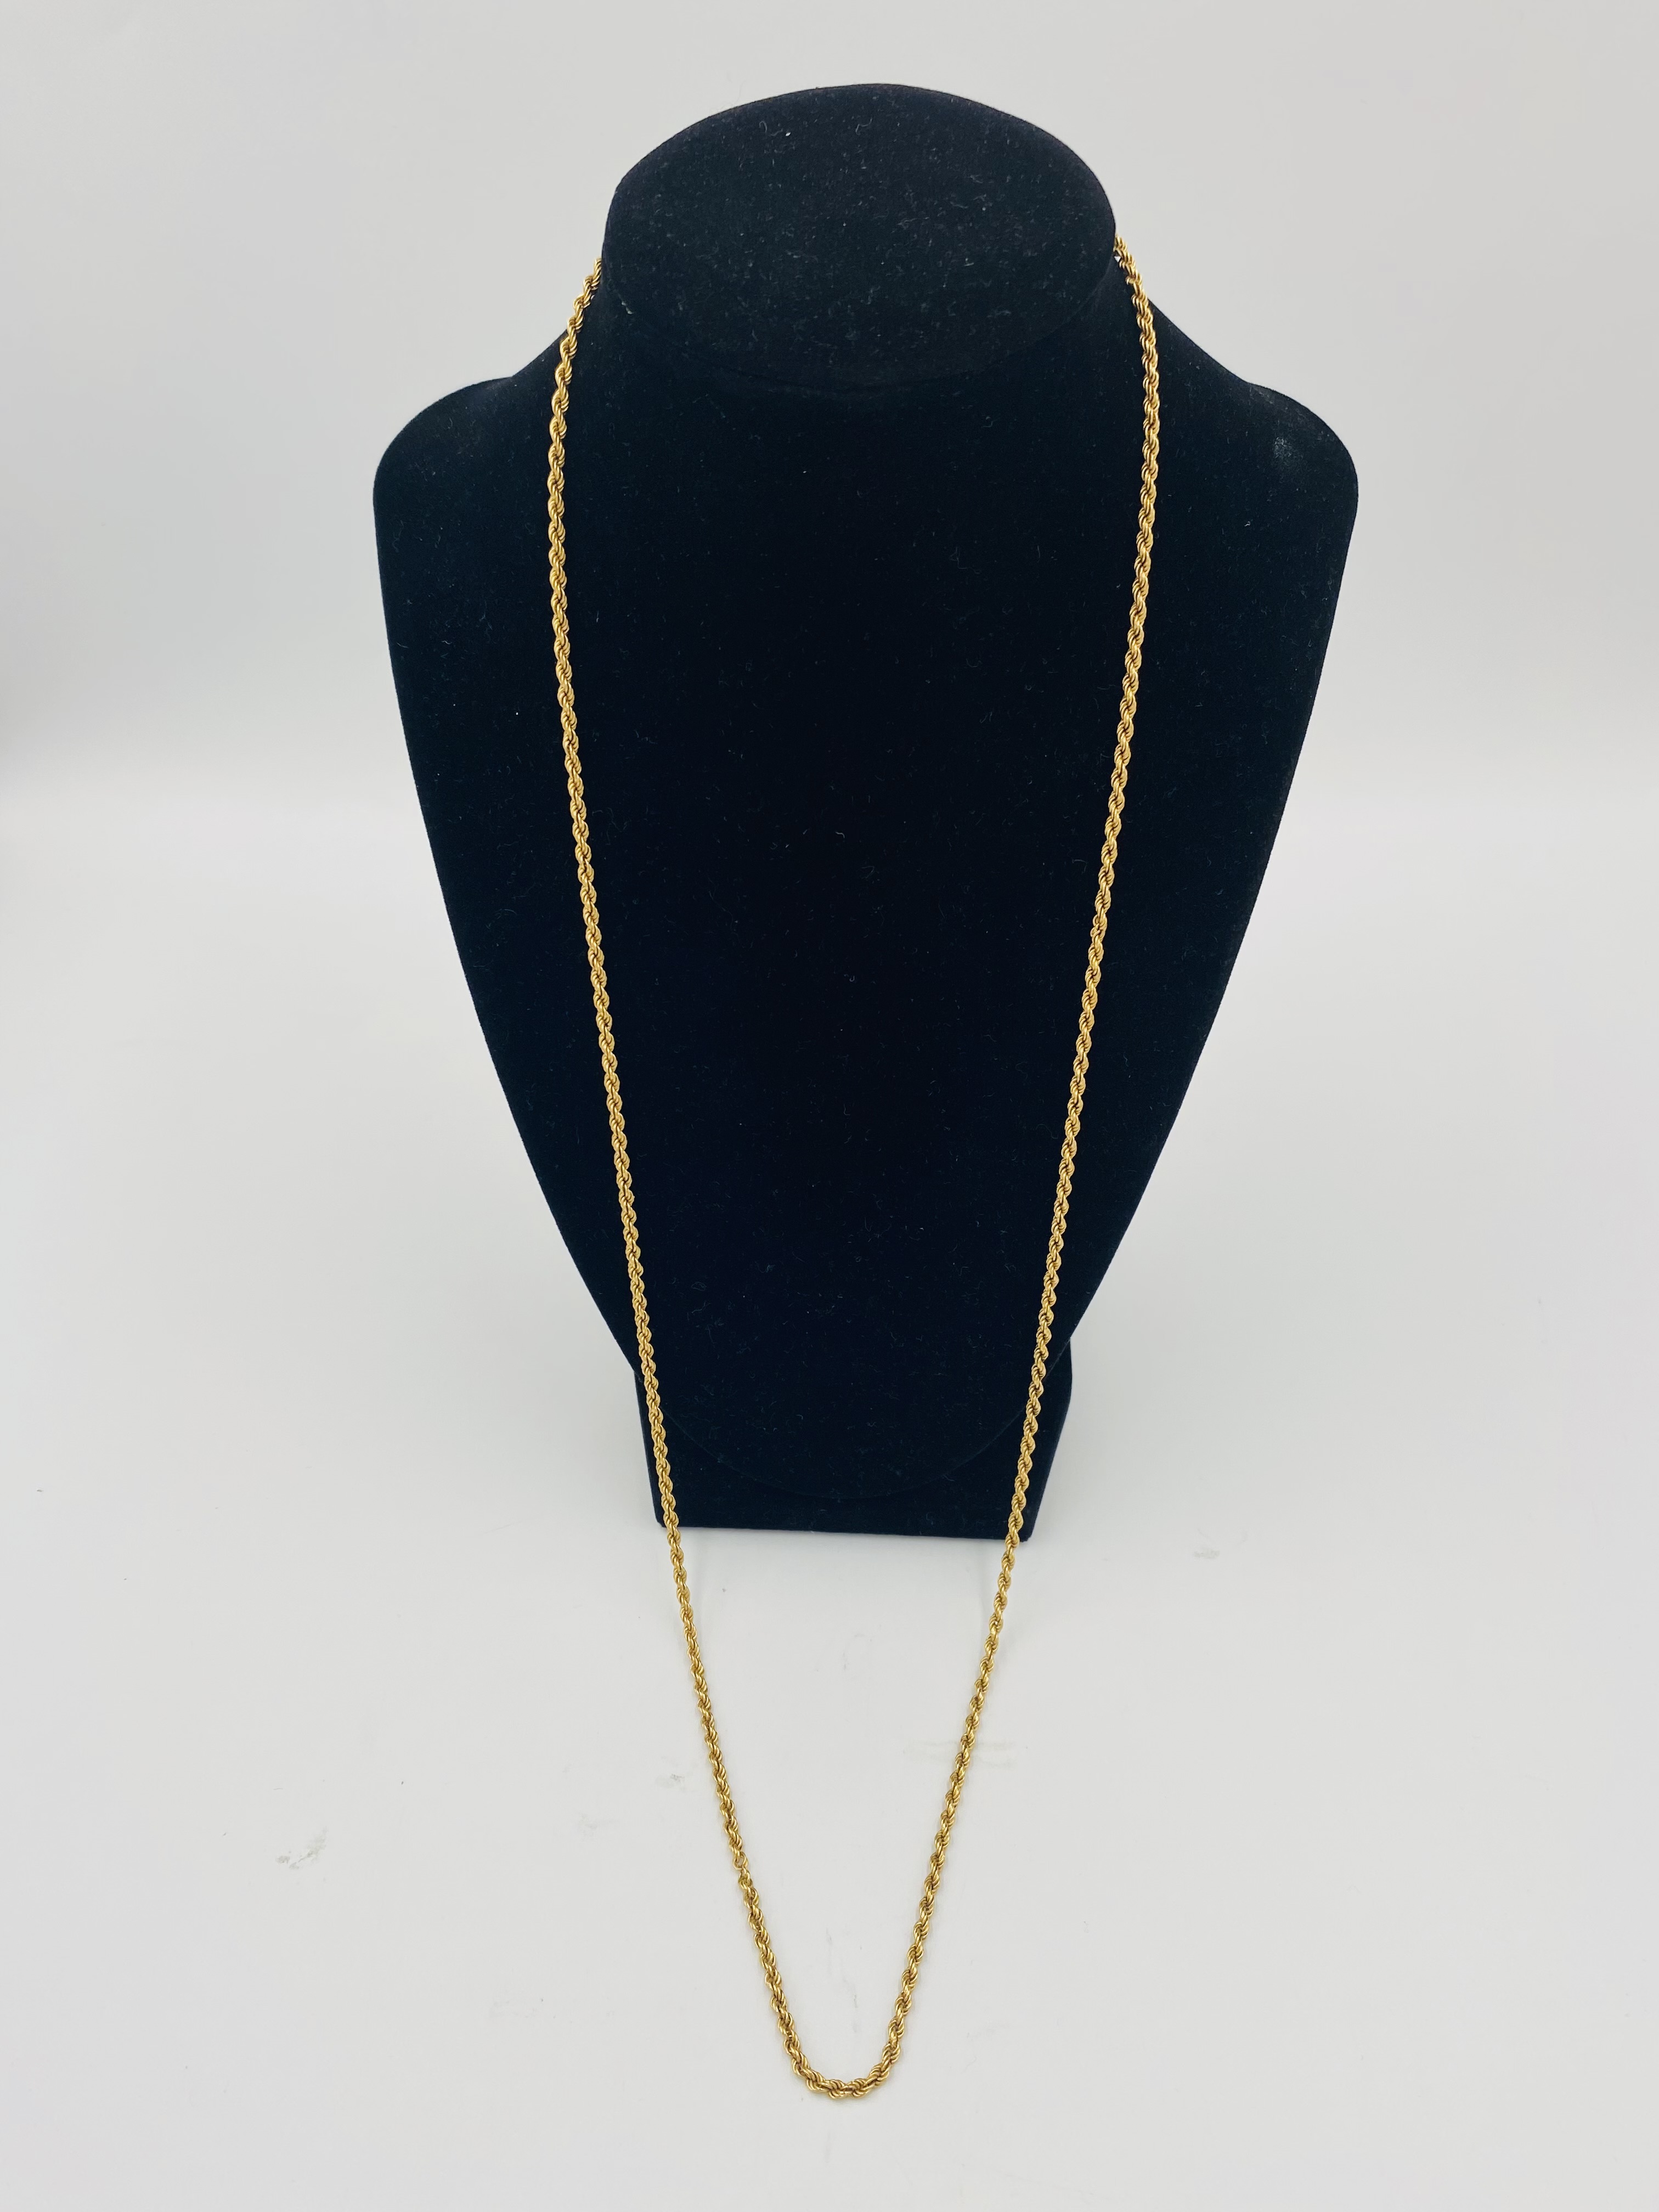 18ct gold necklace - Image 4 of 4